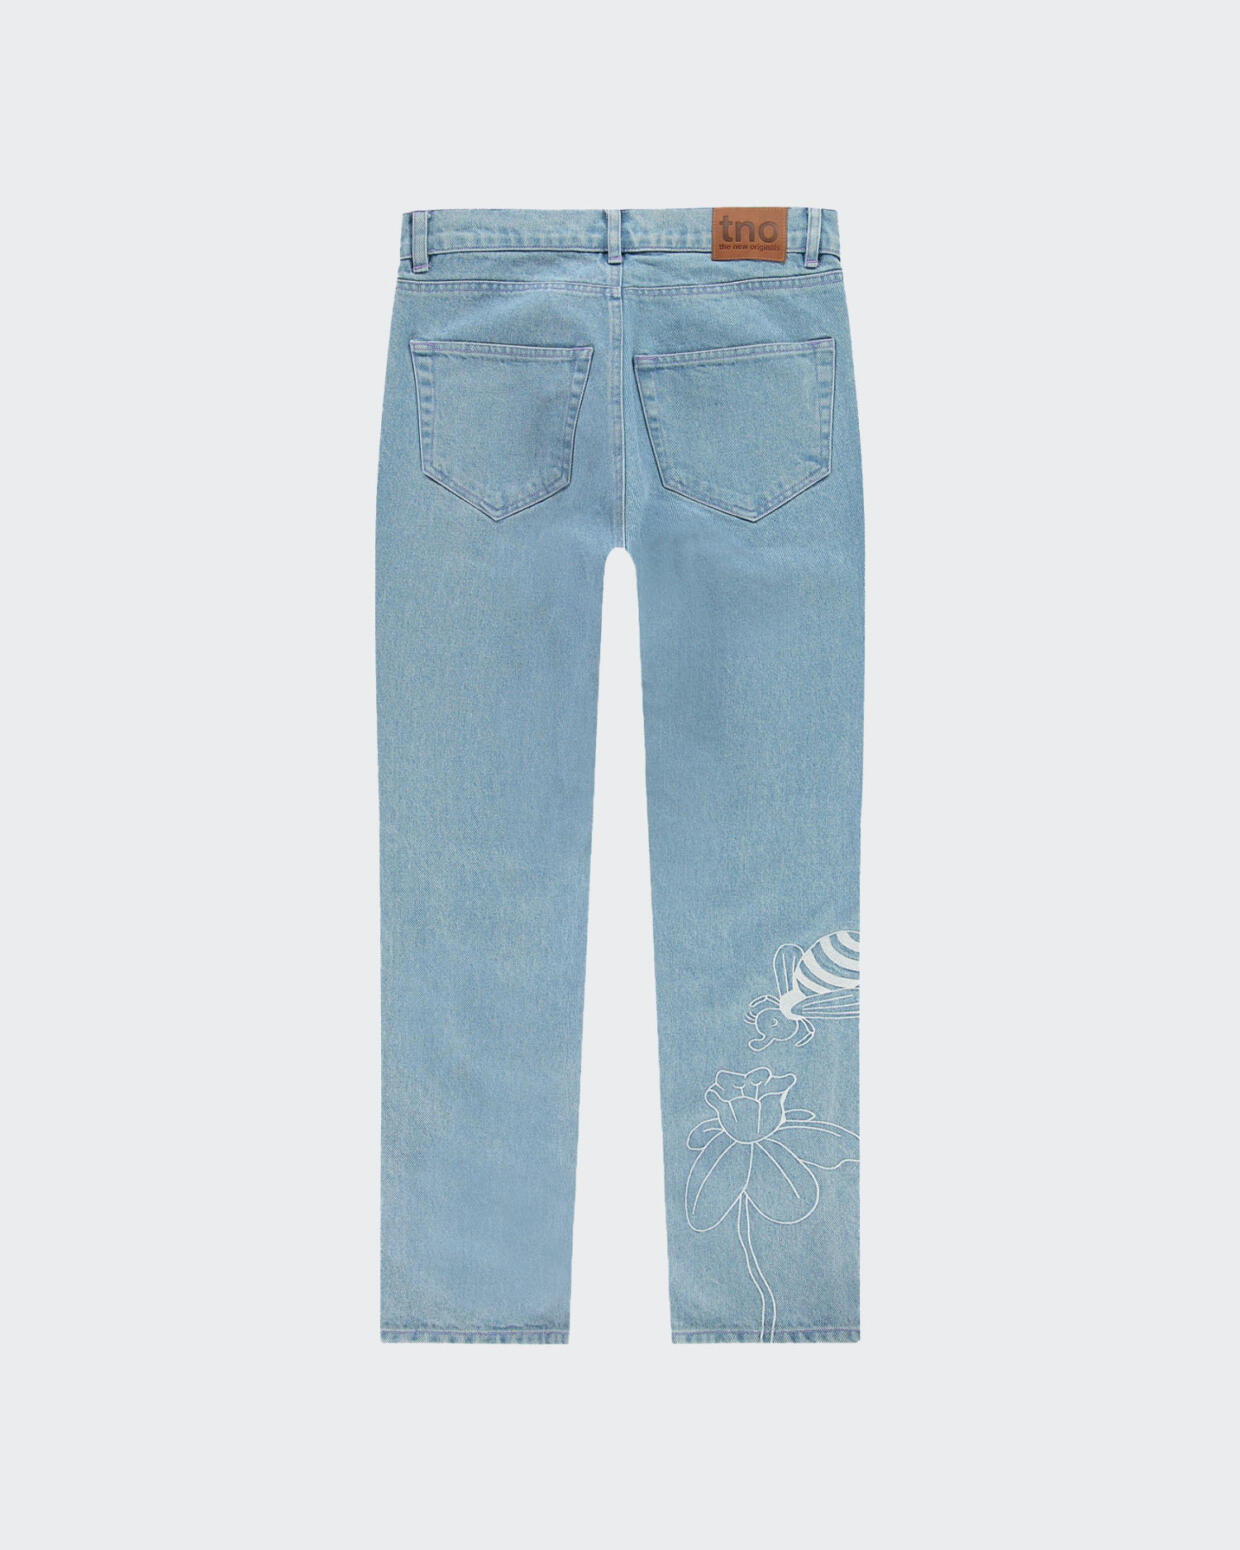 The New Originals Freddy Bee Jeans